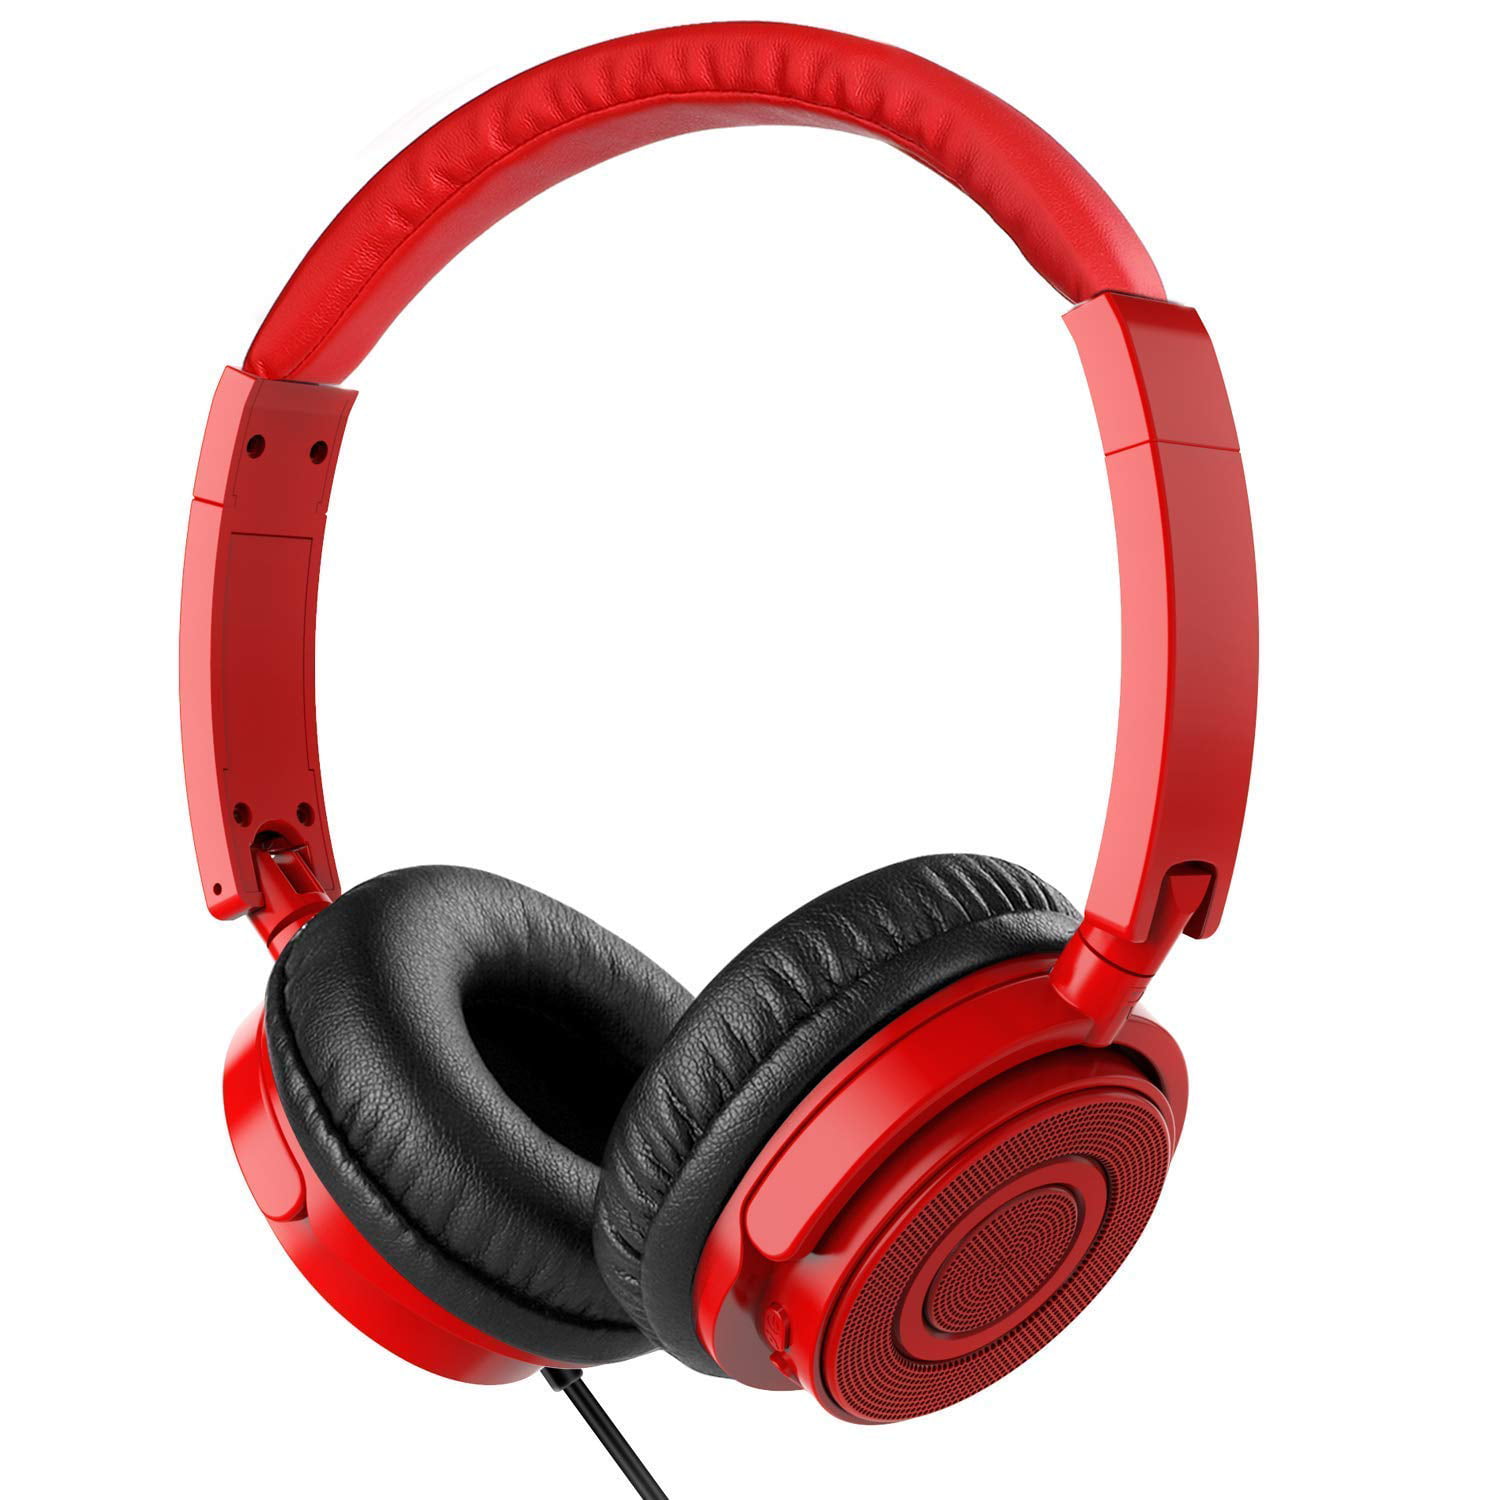 Vogek Wired Foldable Headphones with Mic - Red